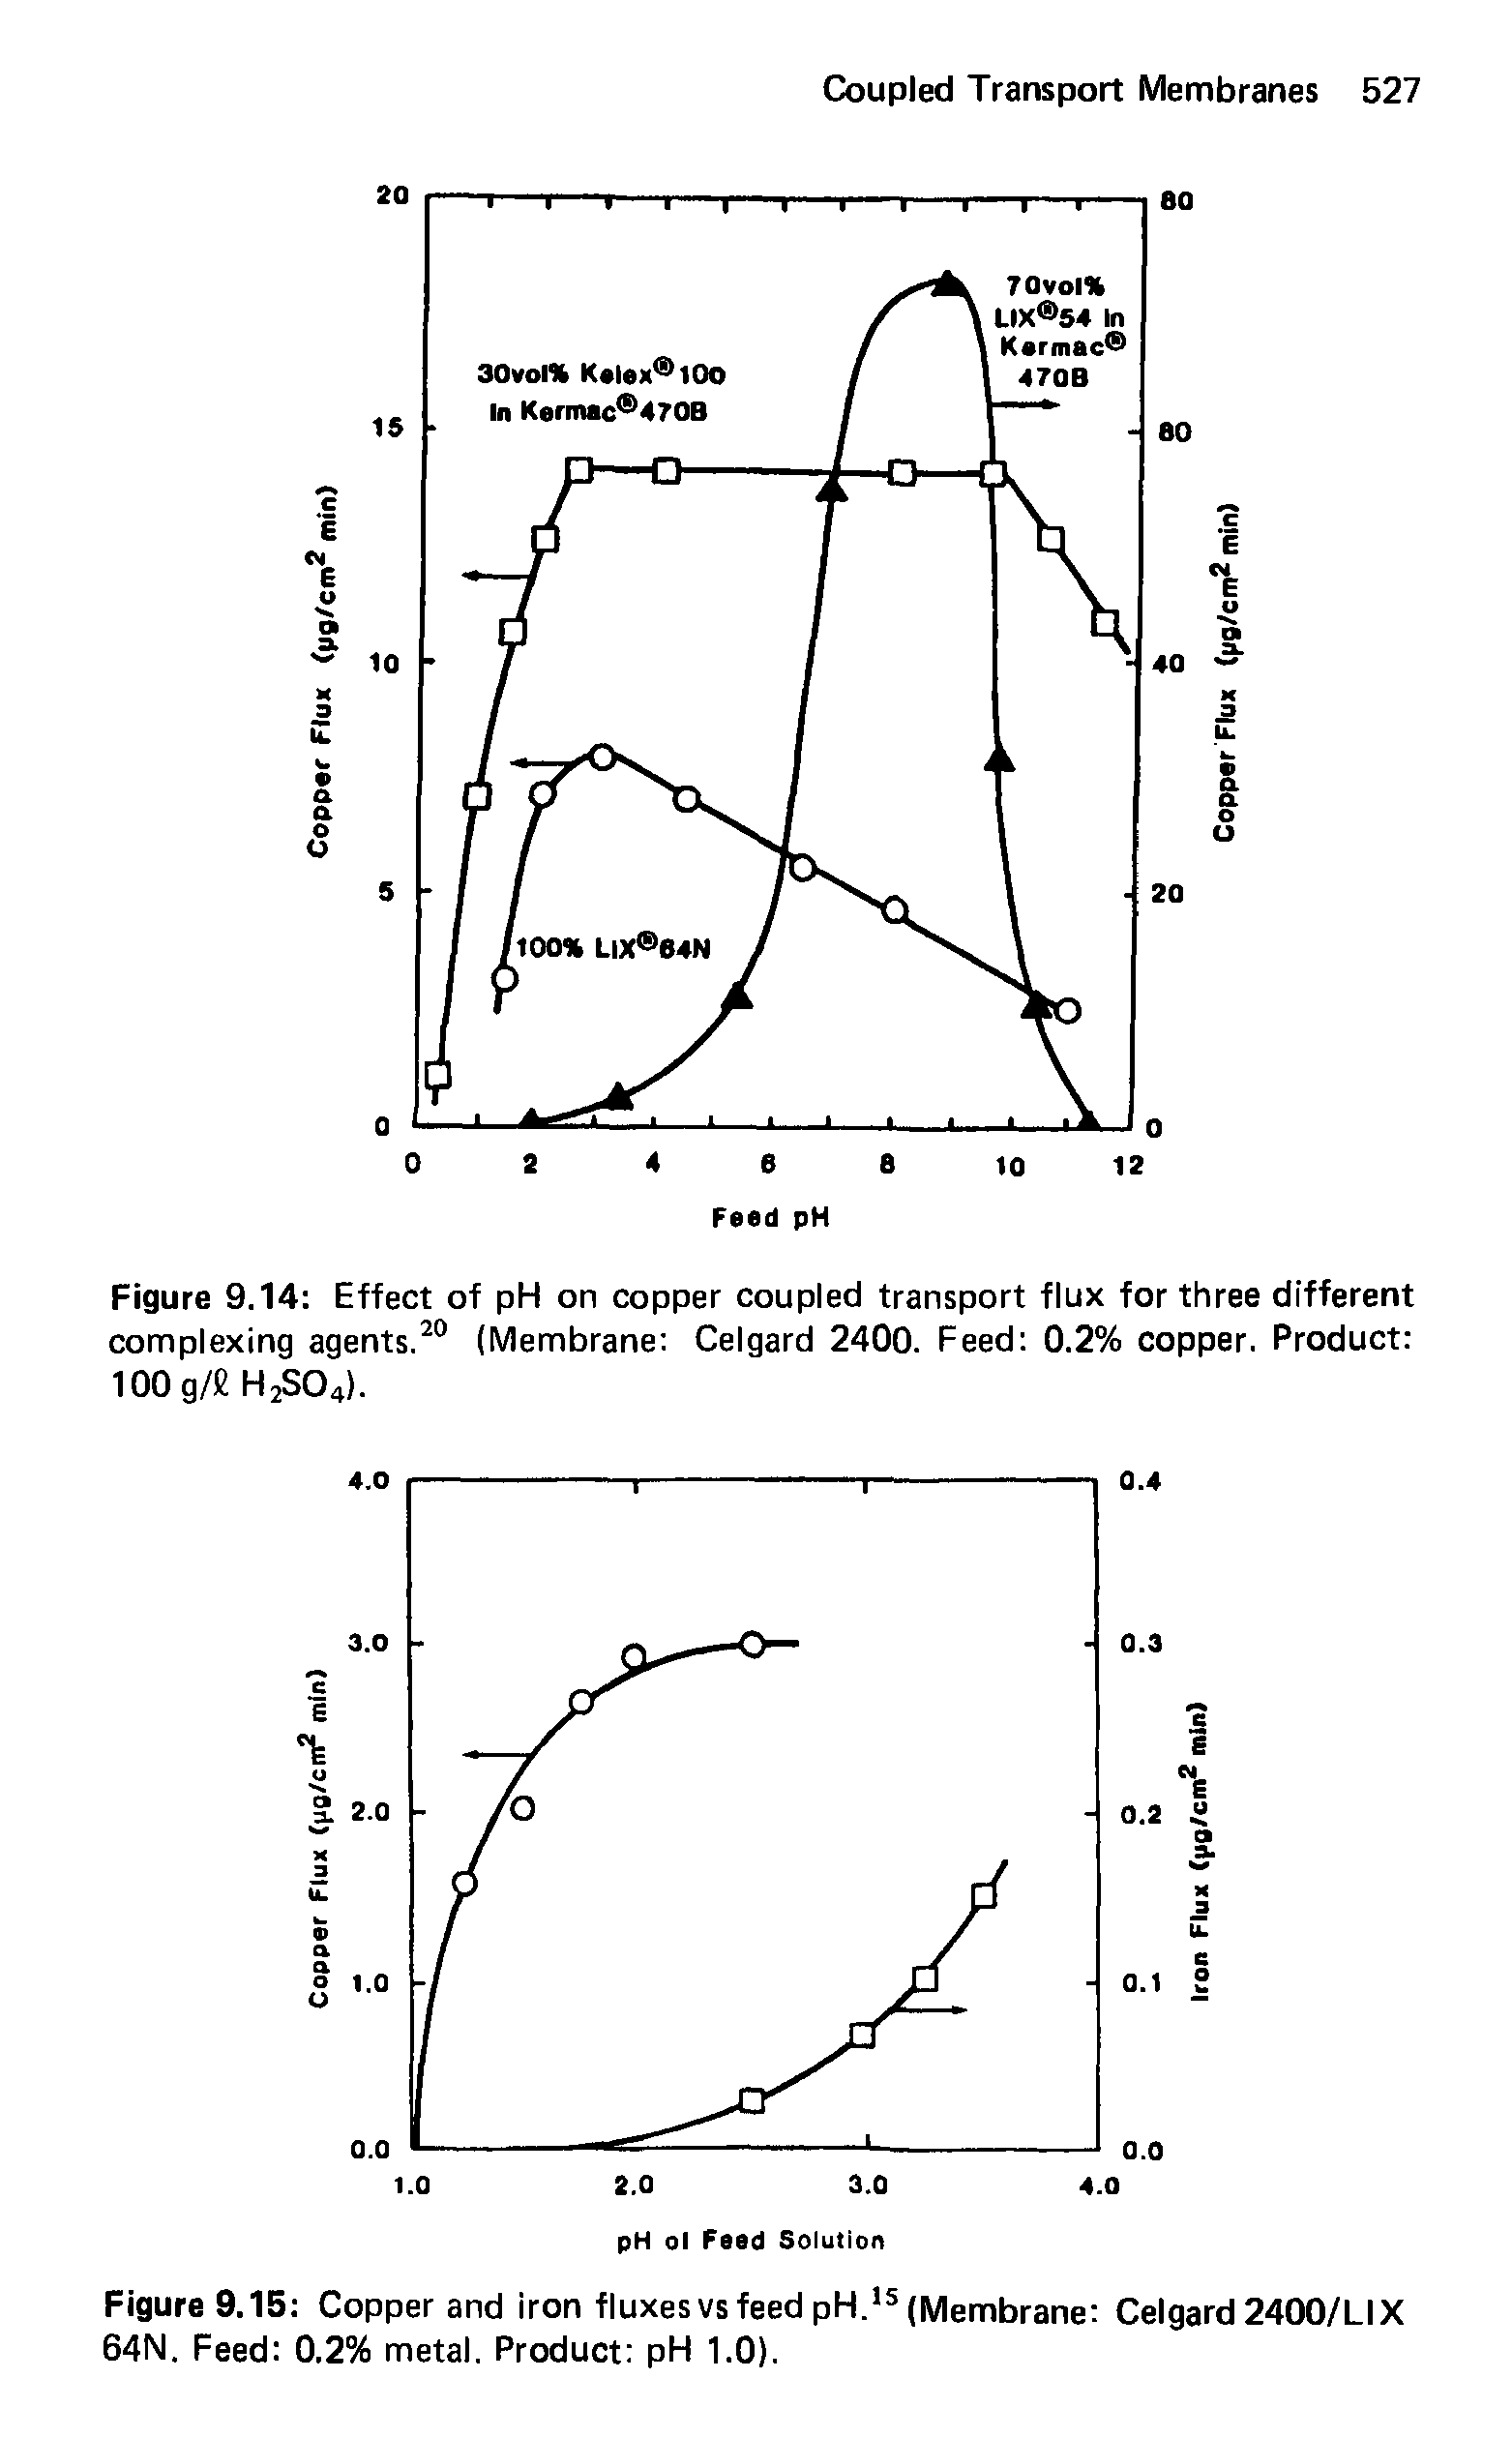 Figure 9.14 Effect of pH on copper coupled transport flux for three different complexing agents.20 (Membrane Celgard 2400. Feed 0.2% copper. Product 100 g/C H2S04).